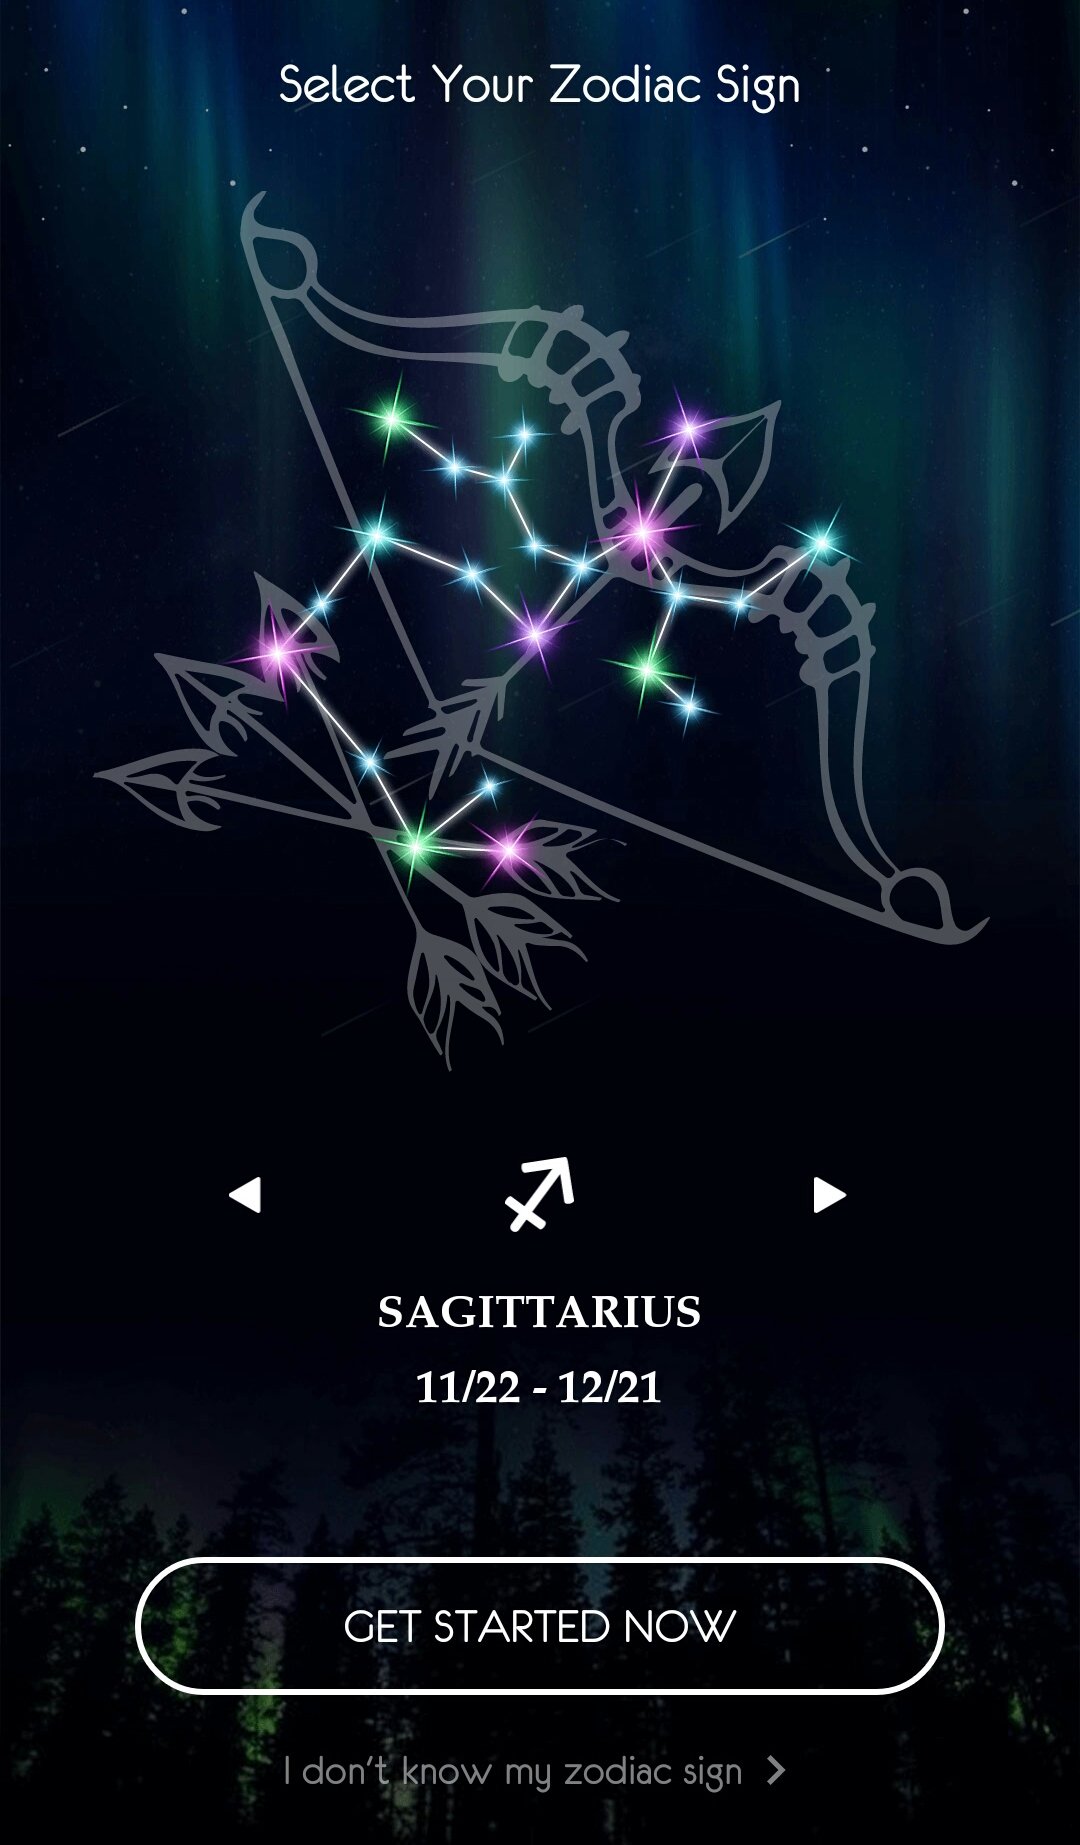 Daily Horoscope Plus 2018 1.4.10 - Download for Android APK Free